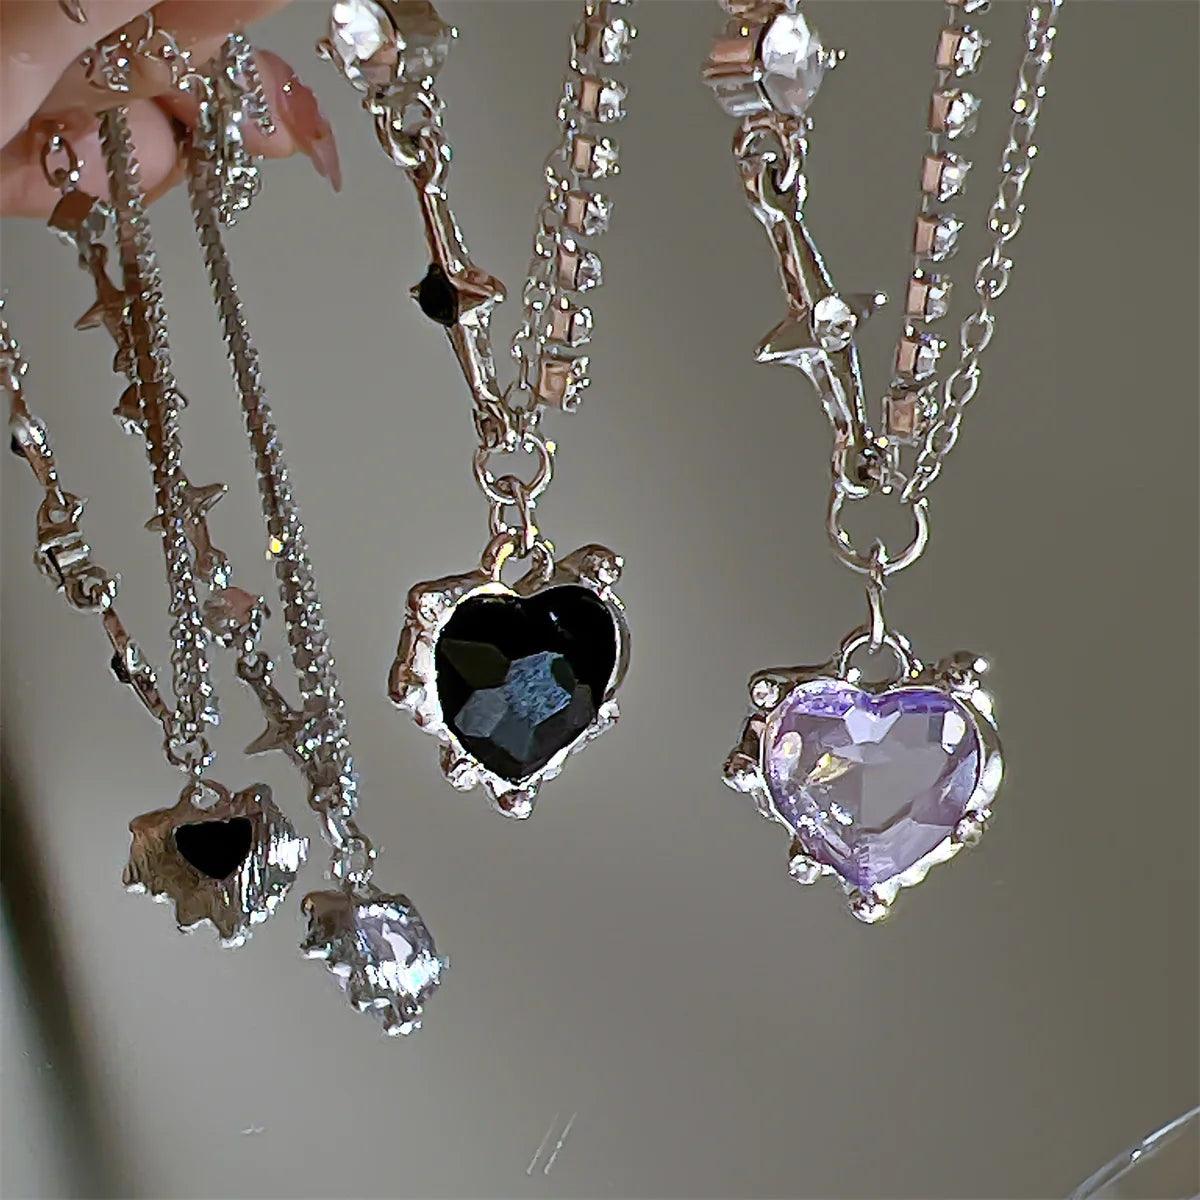 Crystal Heart Necklace - Chic Fashion Accessory for Women and Girls in 2023  ourlum.com   